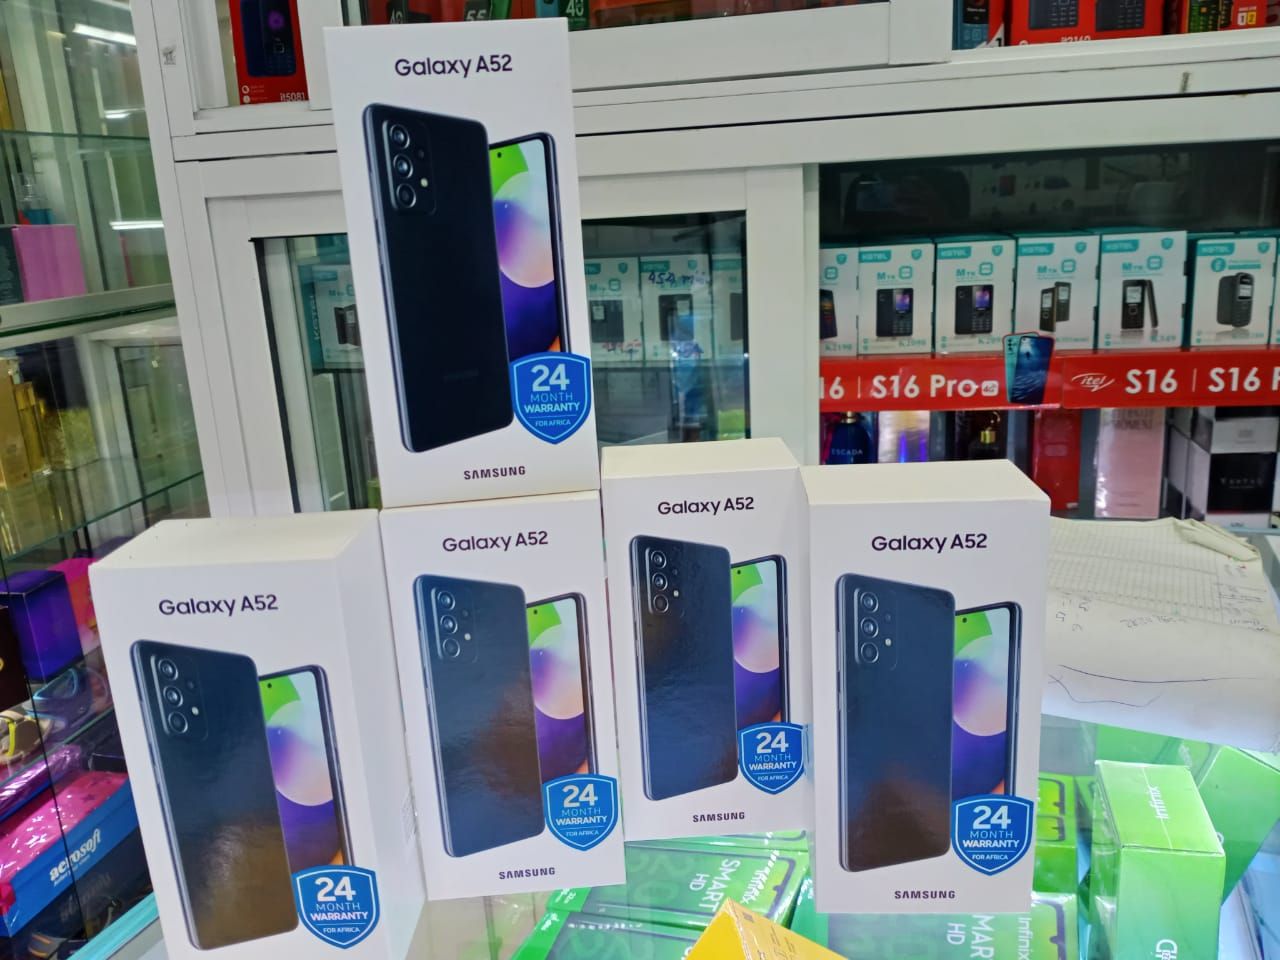 Samsung Phones in Kenya and Their Prices